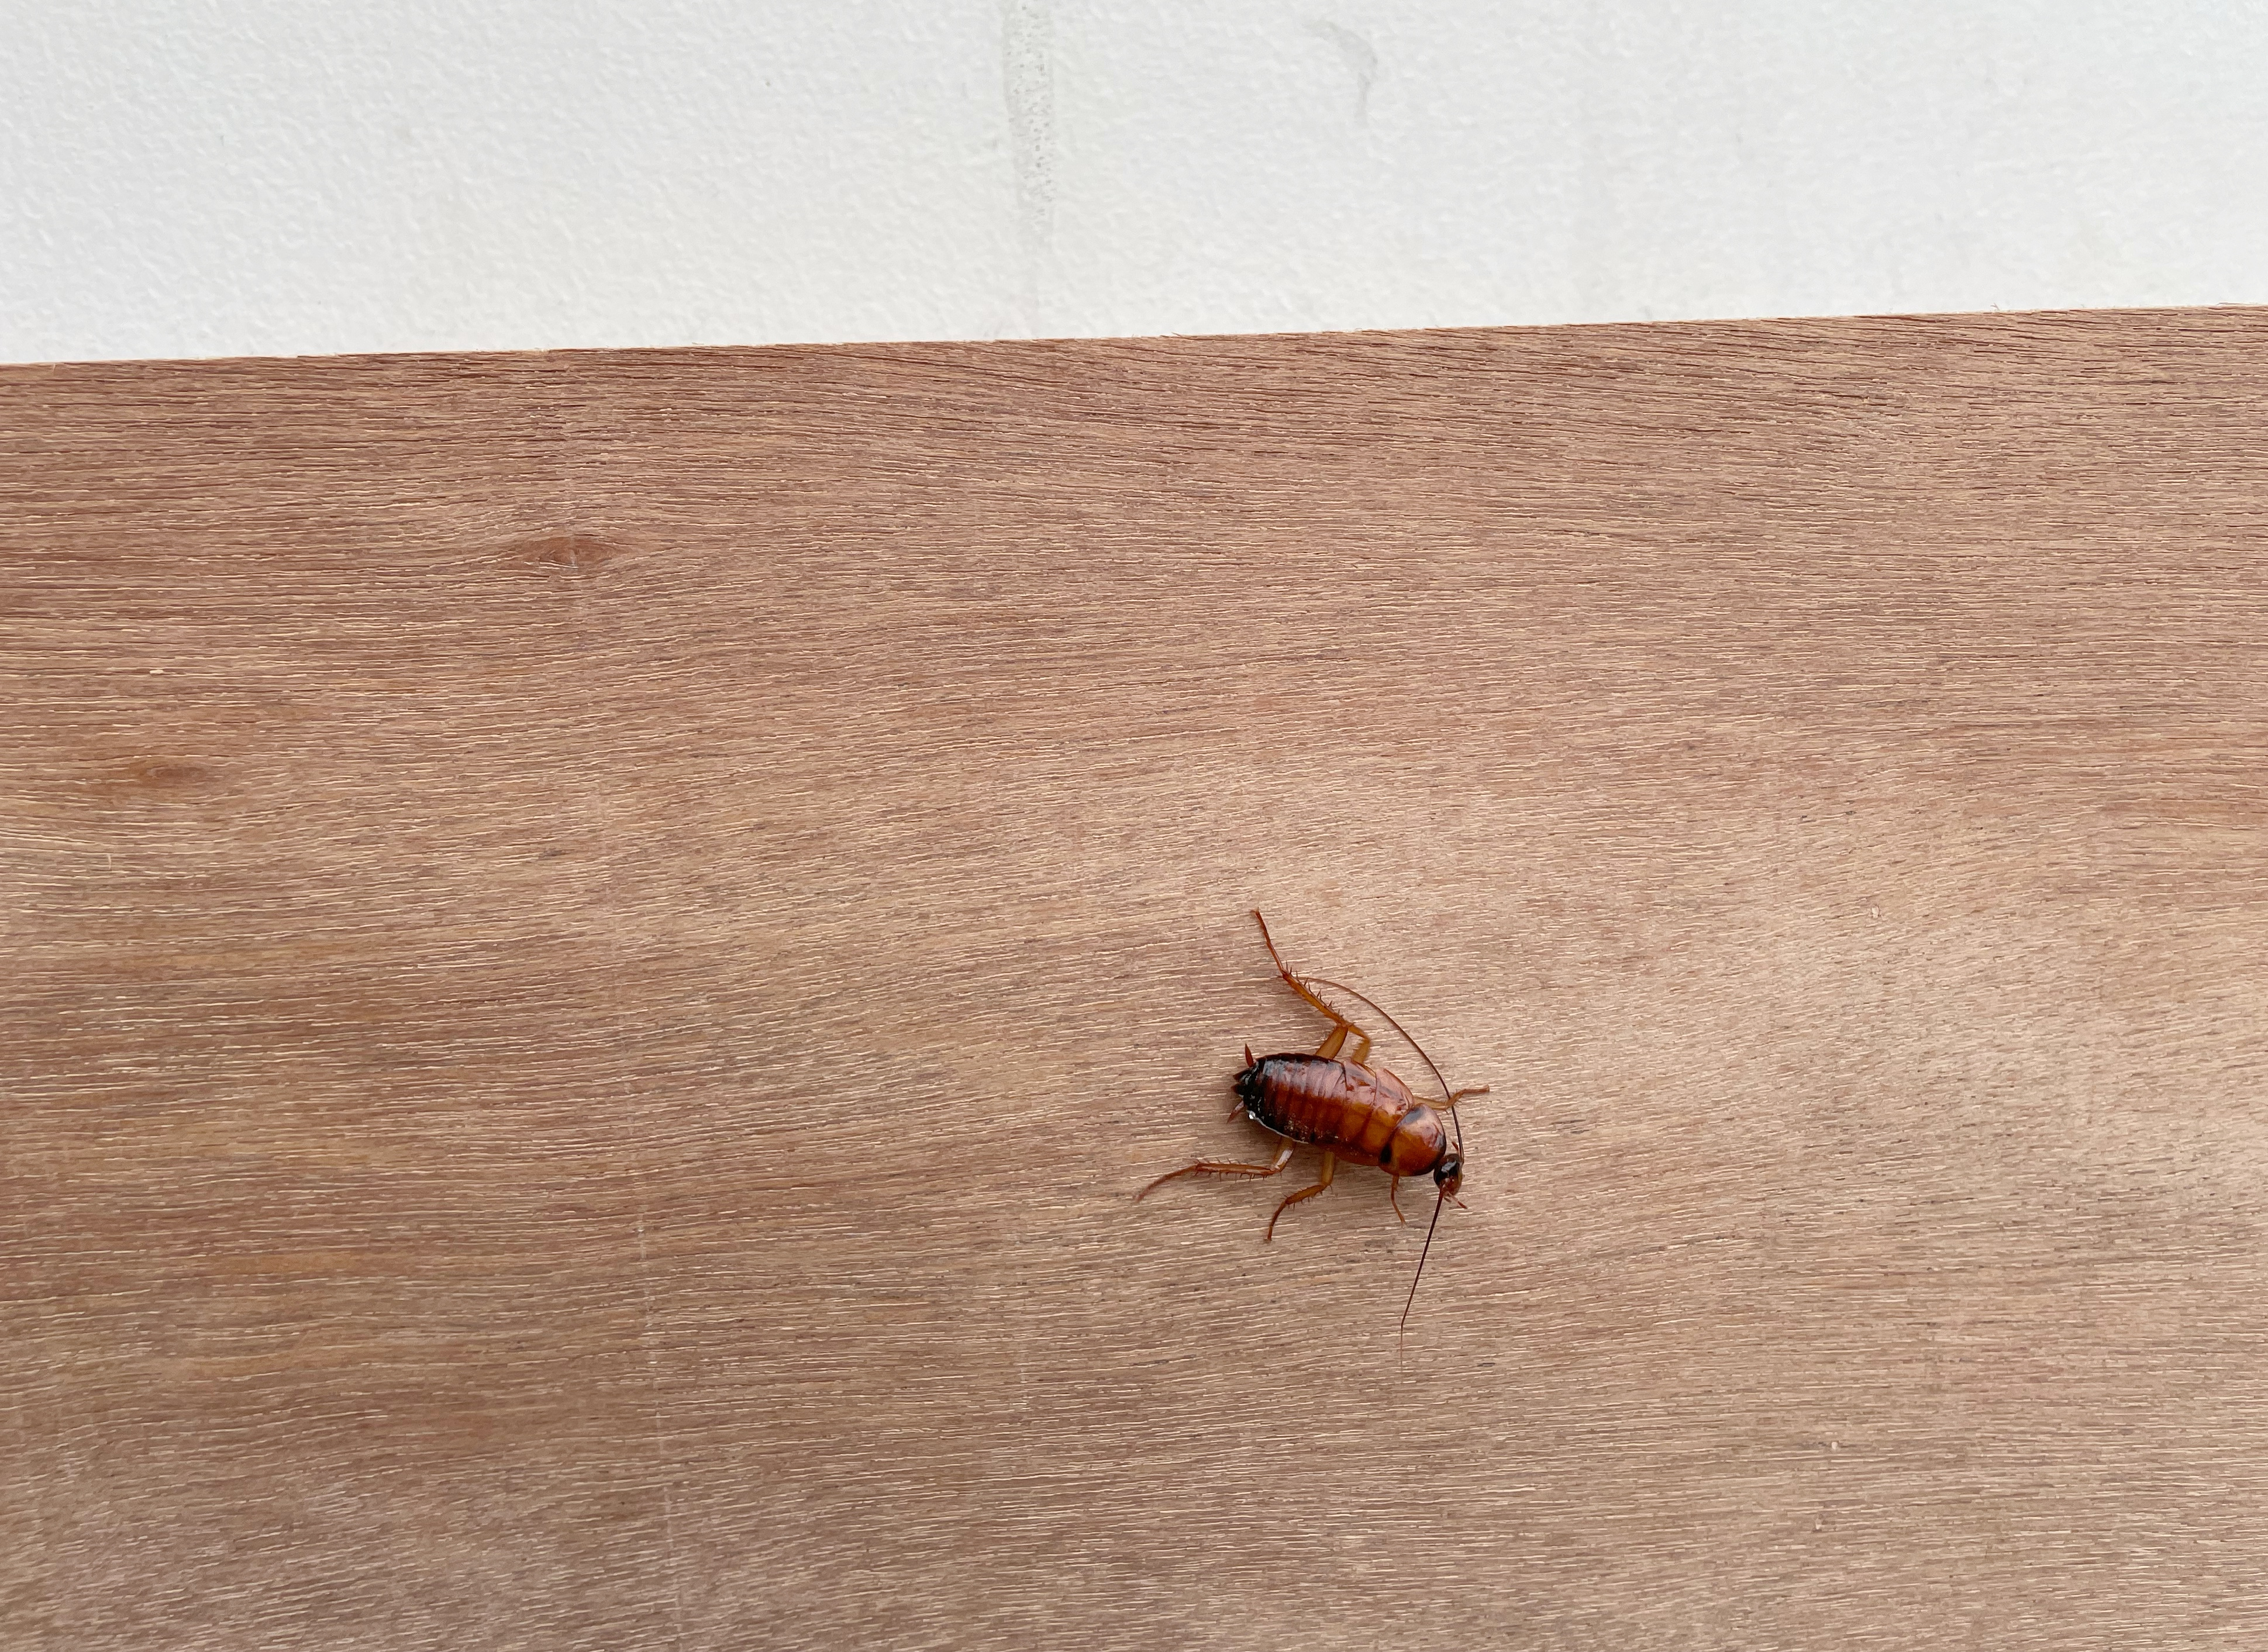 A cockroach on a wooden floor, depicted in a context related to travel accommodations